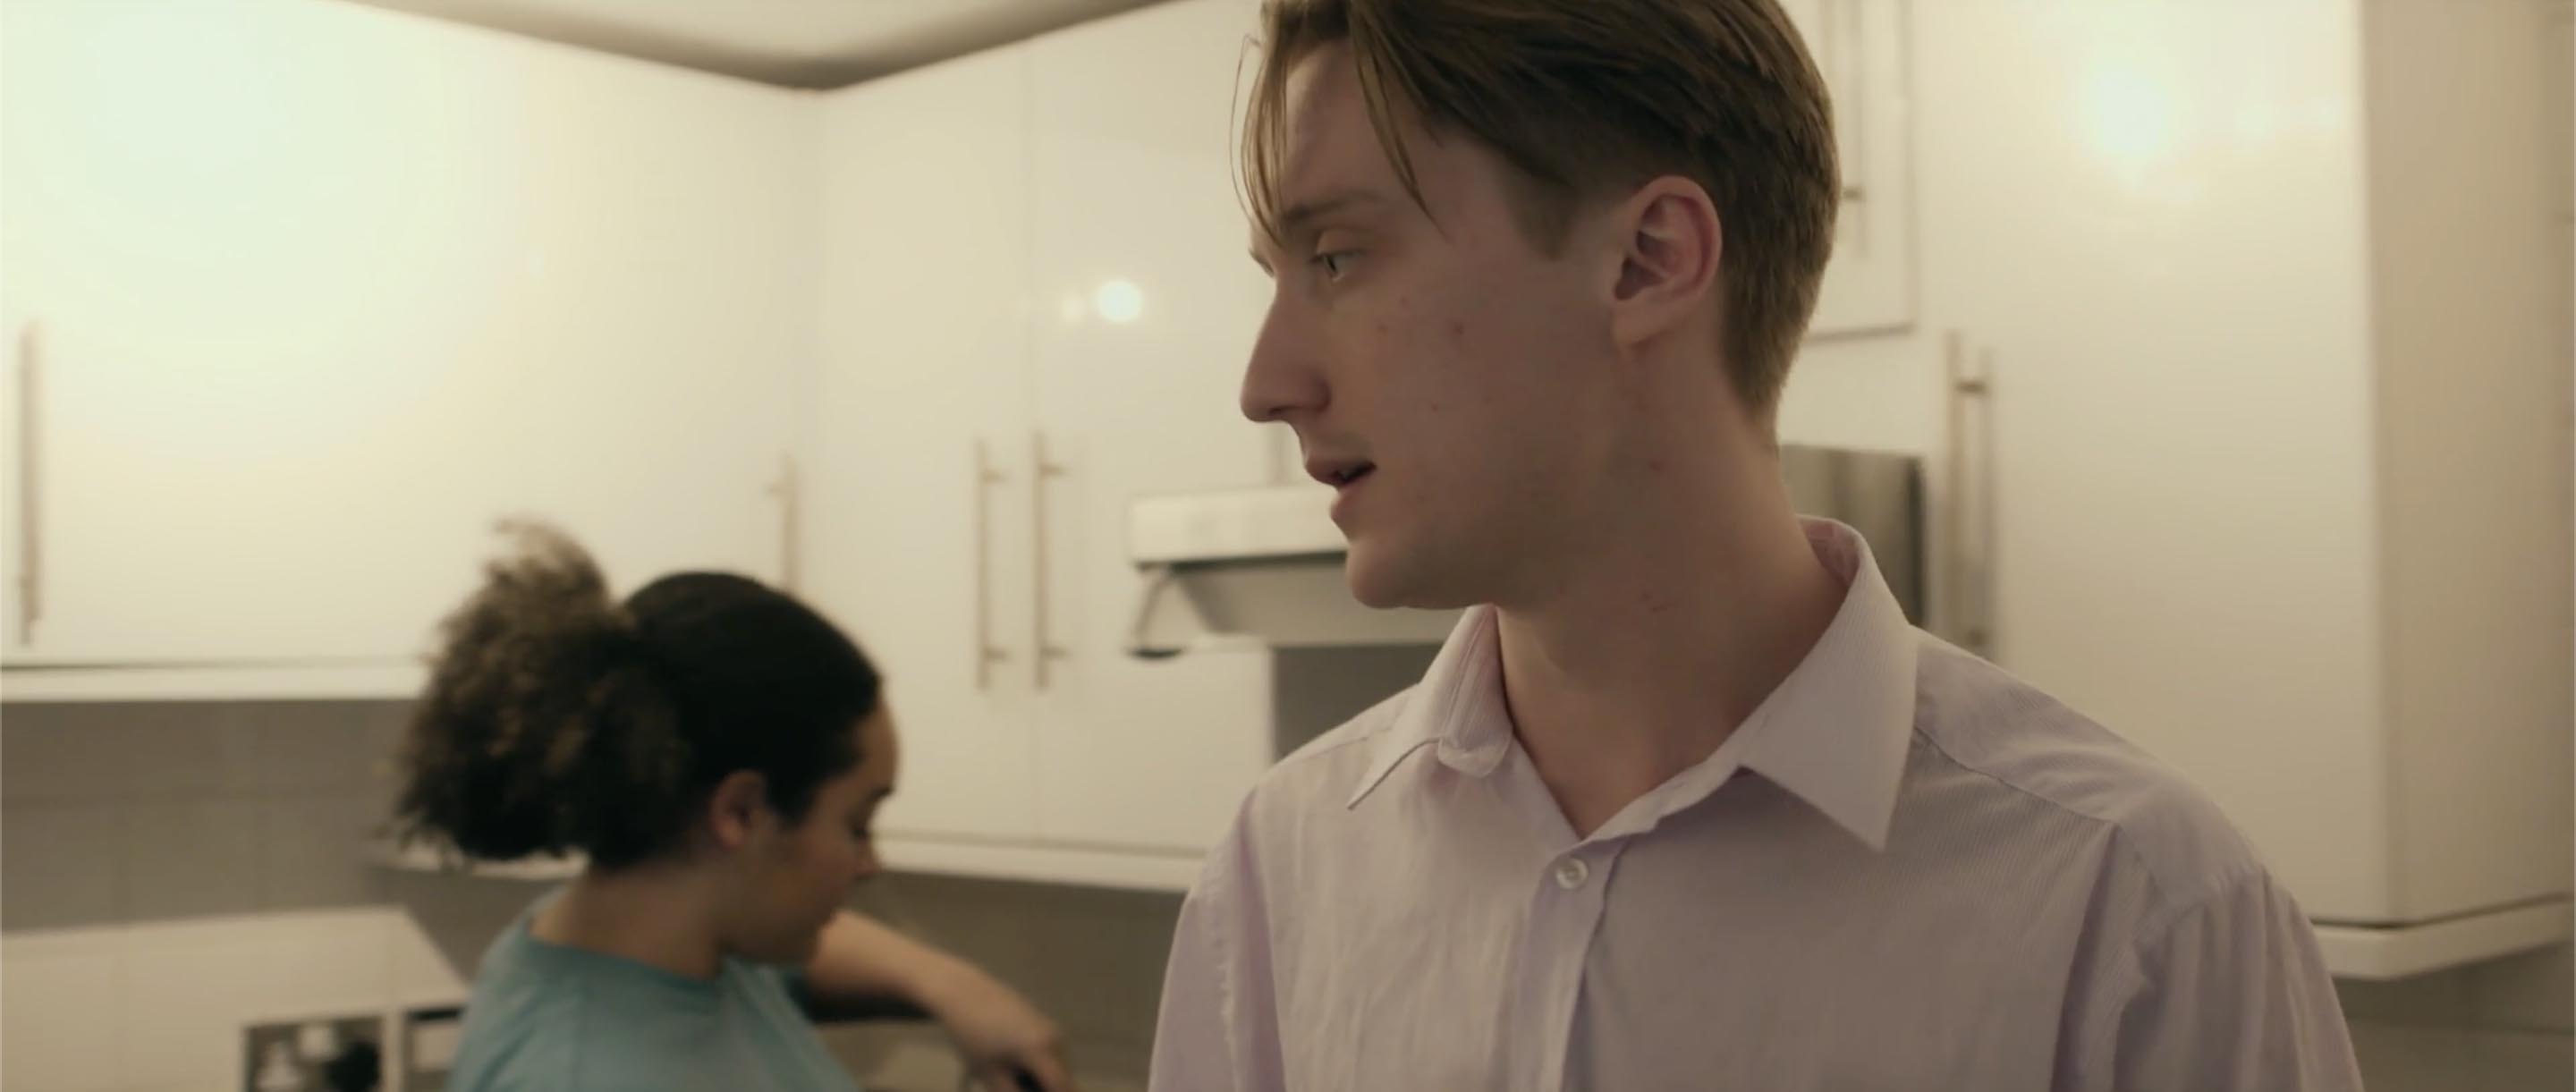 Still from graduate film 'Working Title' shot by South Cuatriz featuring two characters having a conversation in a kitchen